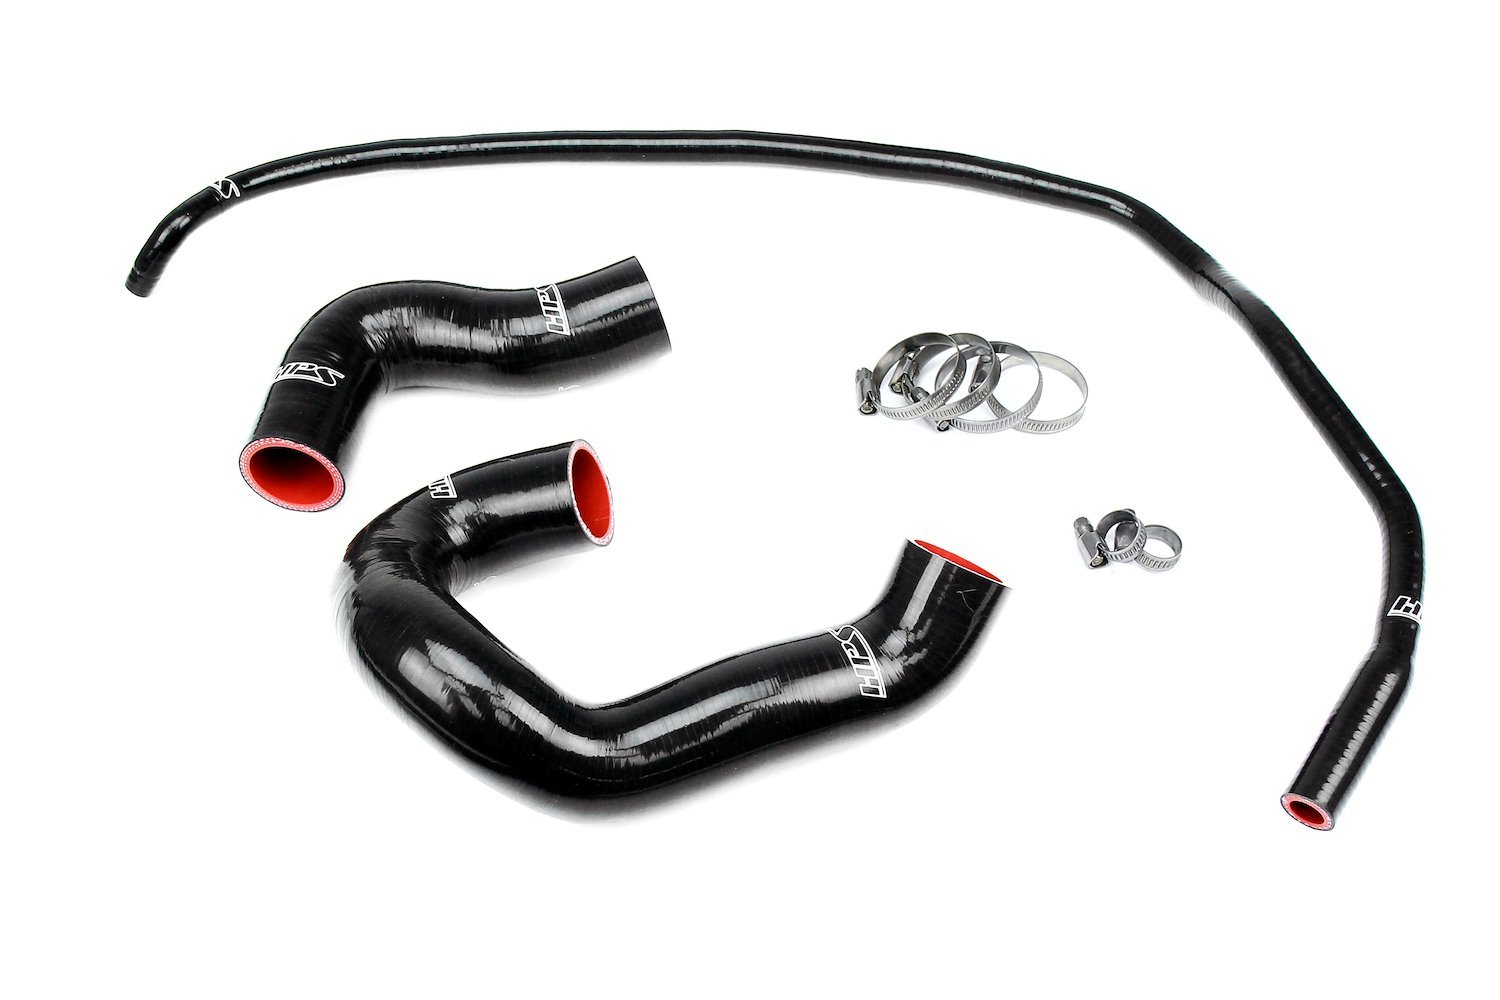 57-2160-BLK Radiator Hose Kit, 3-Ply Reinforced Silicone, Replaces Rubber Radiator & Coolant Tank Hoses